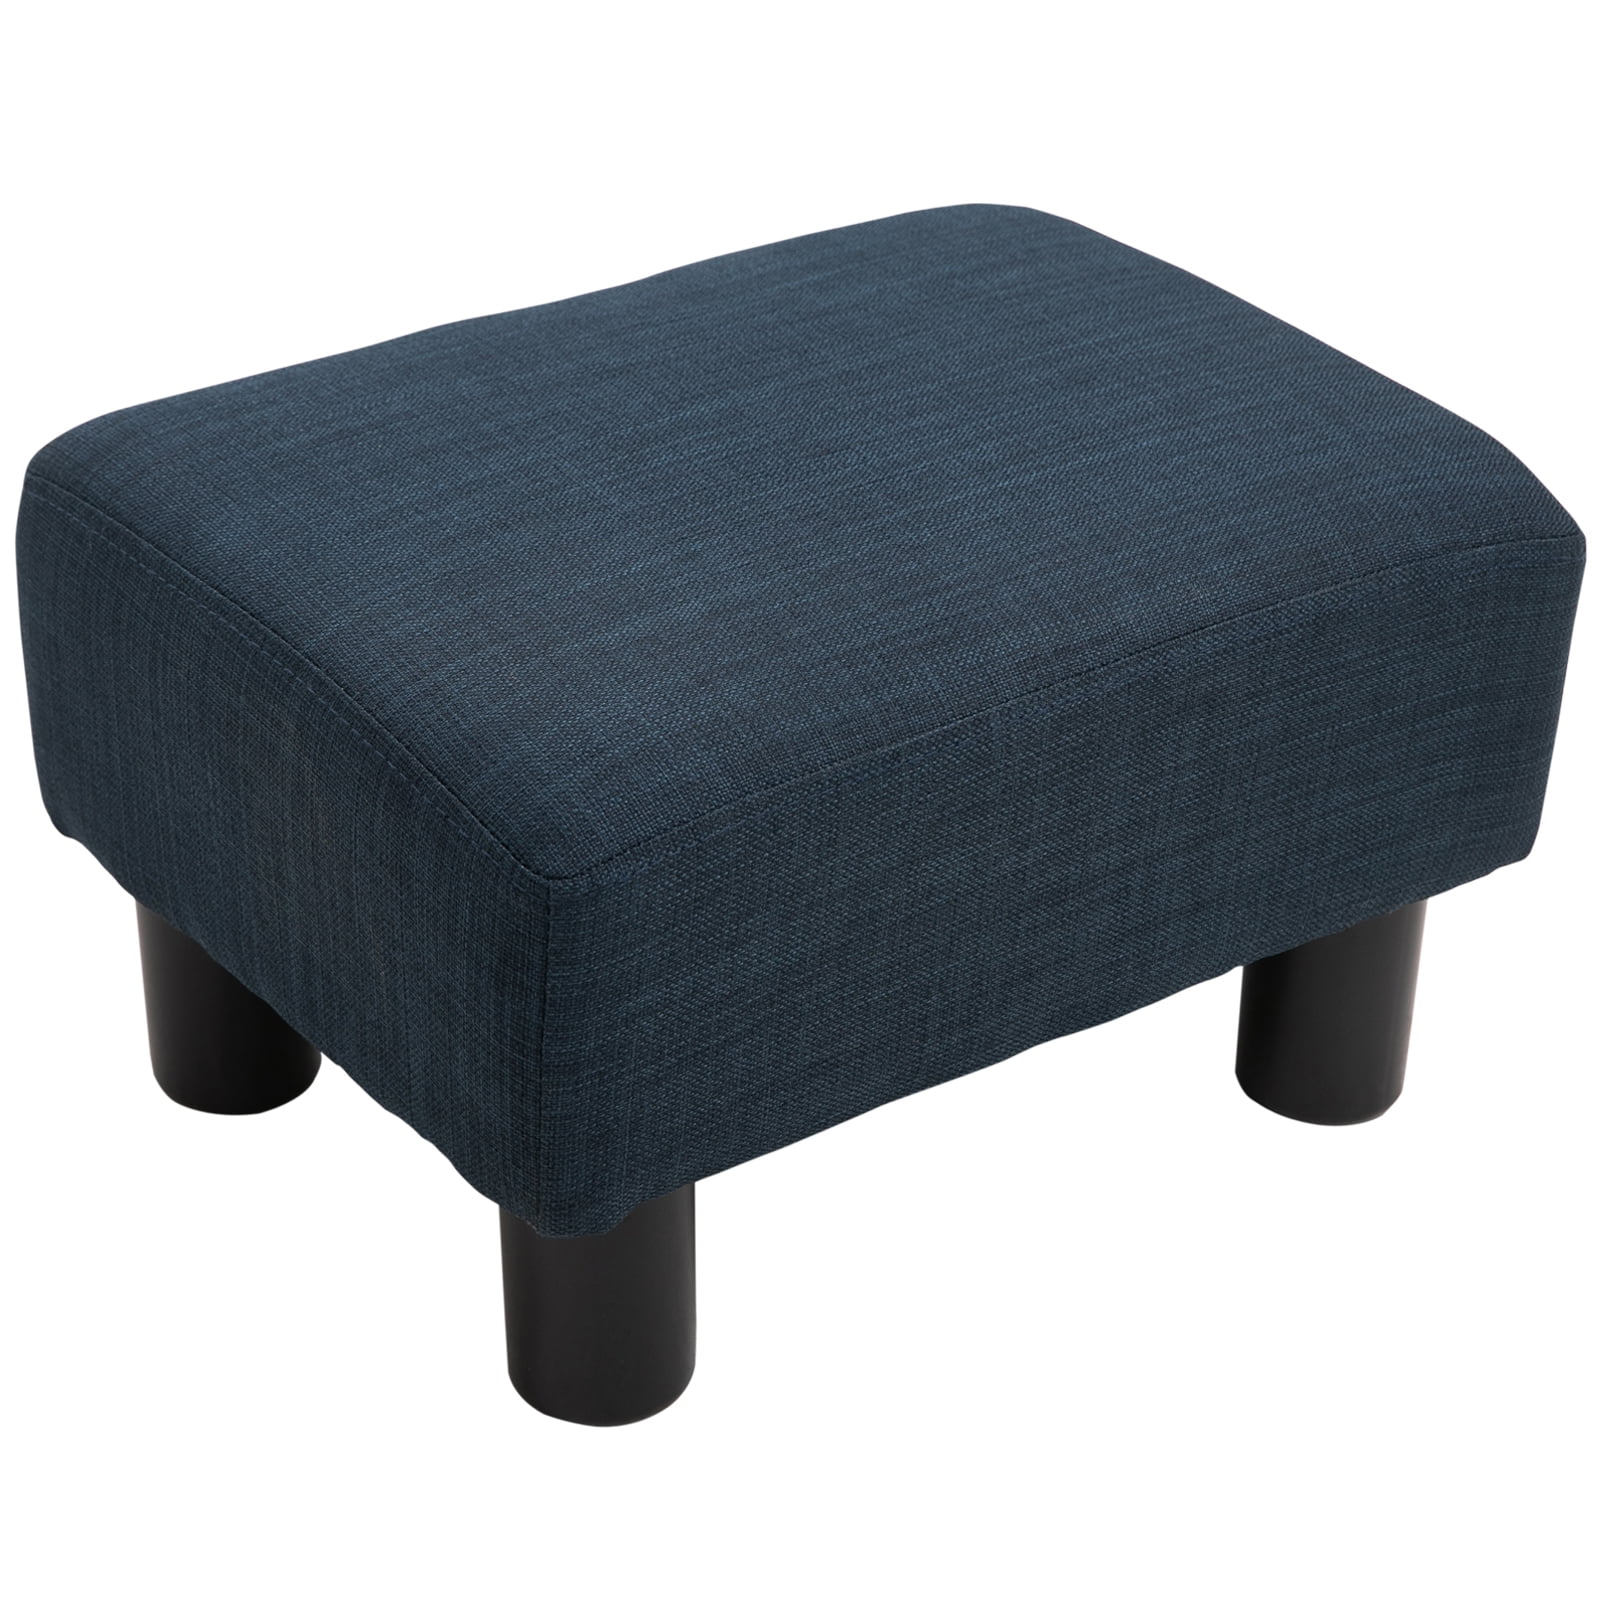 net Round Ottoman Foot Stool Upholstered Padded Pouf with Wooden Legs Linen Fabric Cover 